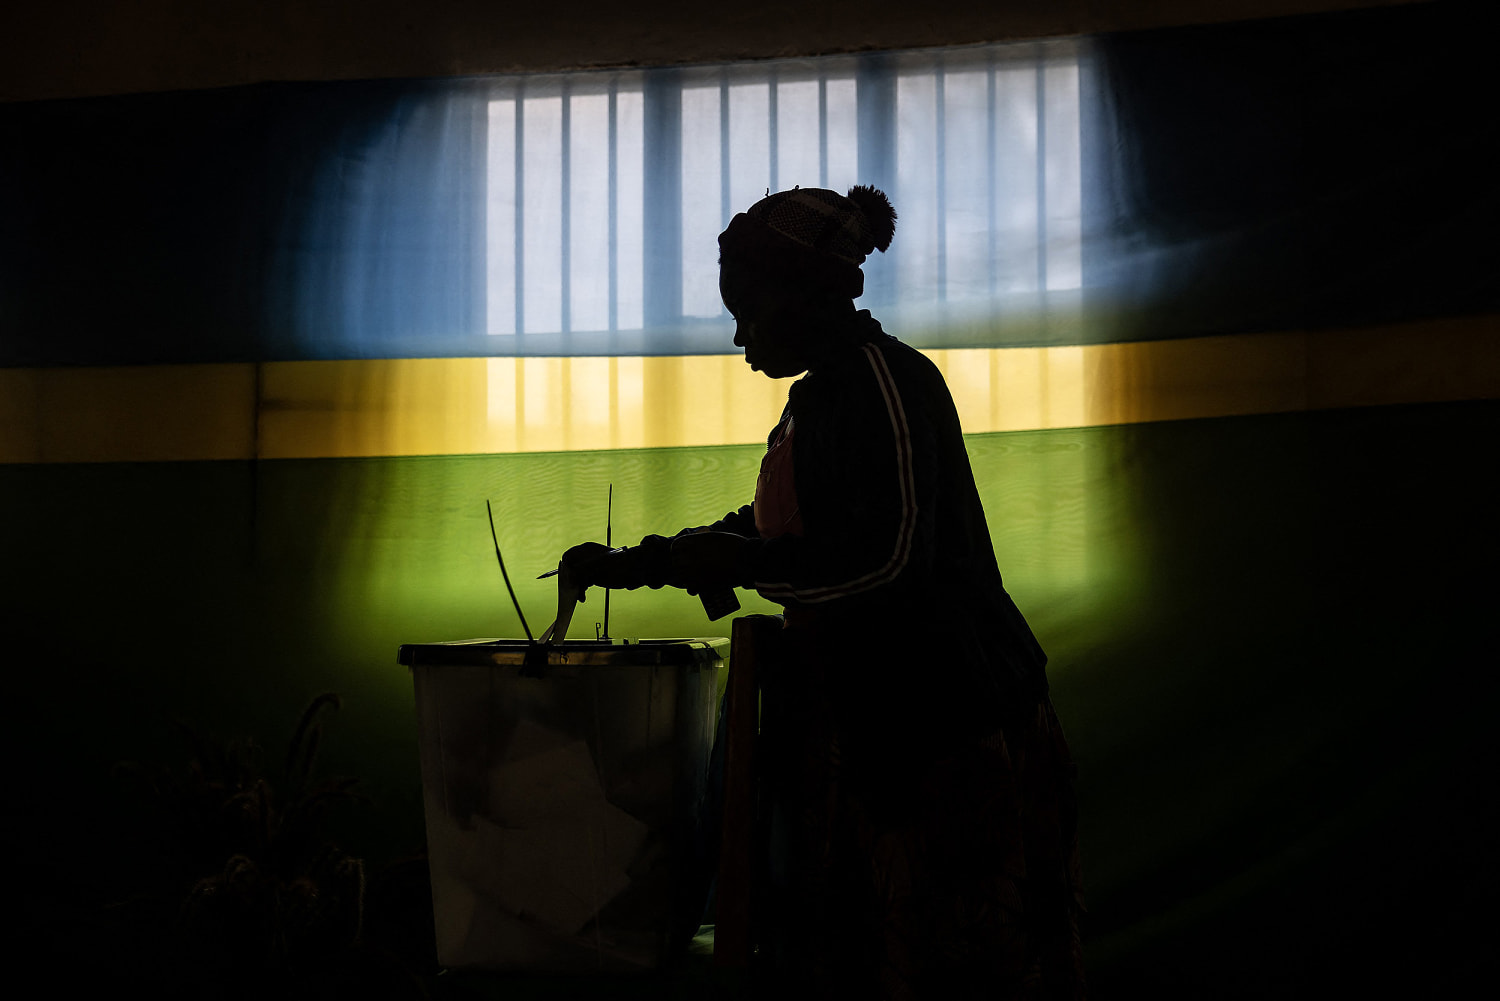 Rwanda's Kagame wins 99% of vote in election, as expected